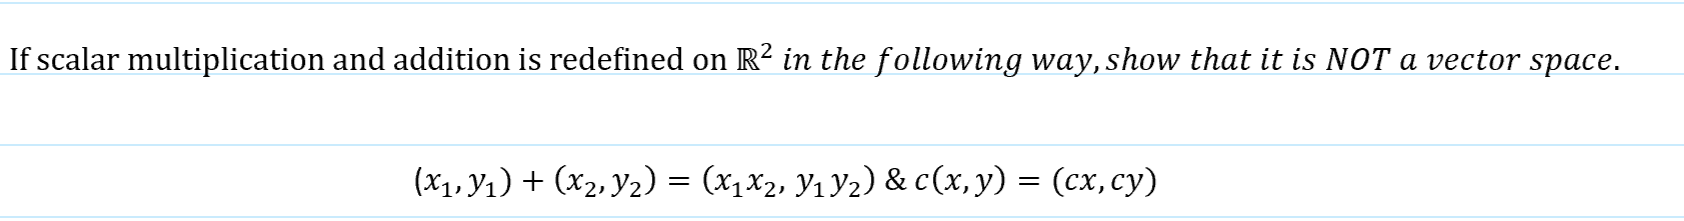 If scalar multiplication and addition is redefined on R² in the following way, show that it is NOT a vector space.
(x1, Y1) + (x2, Y2) = (x1x2, Y1 Y2) & c(x, y) = (cx,cy)
